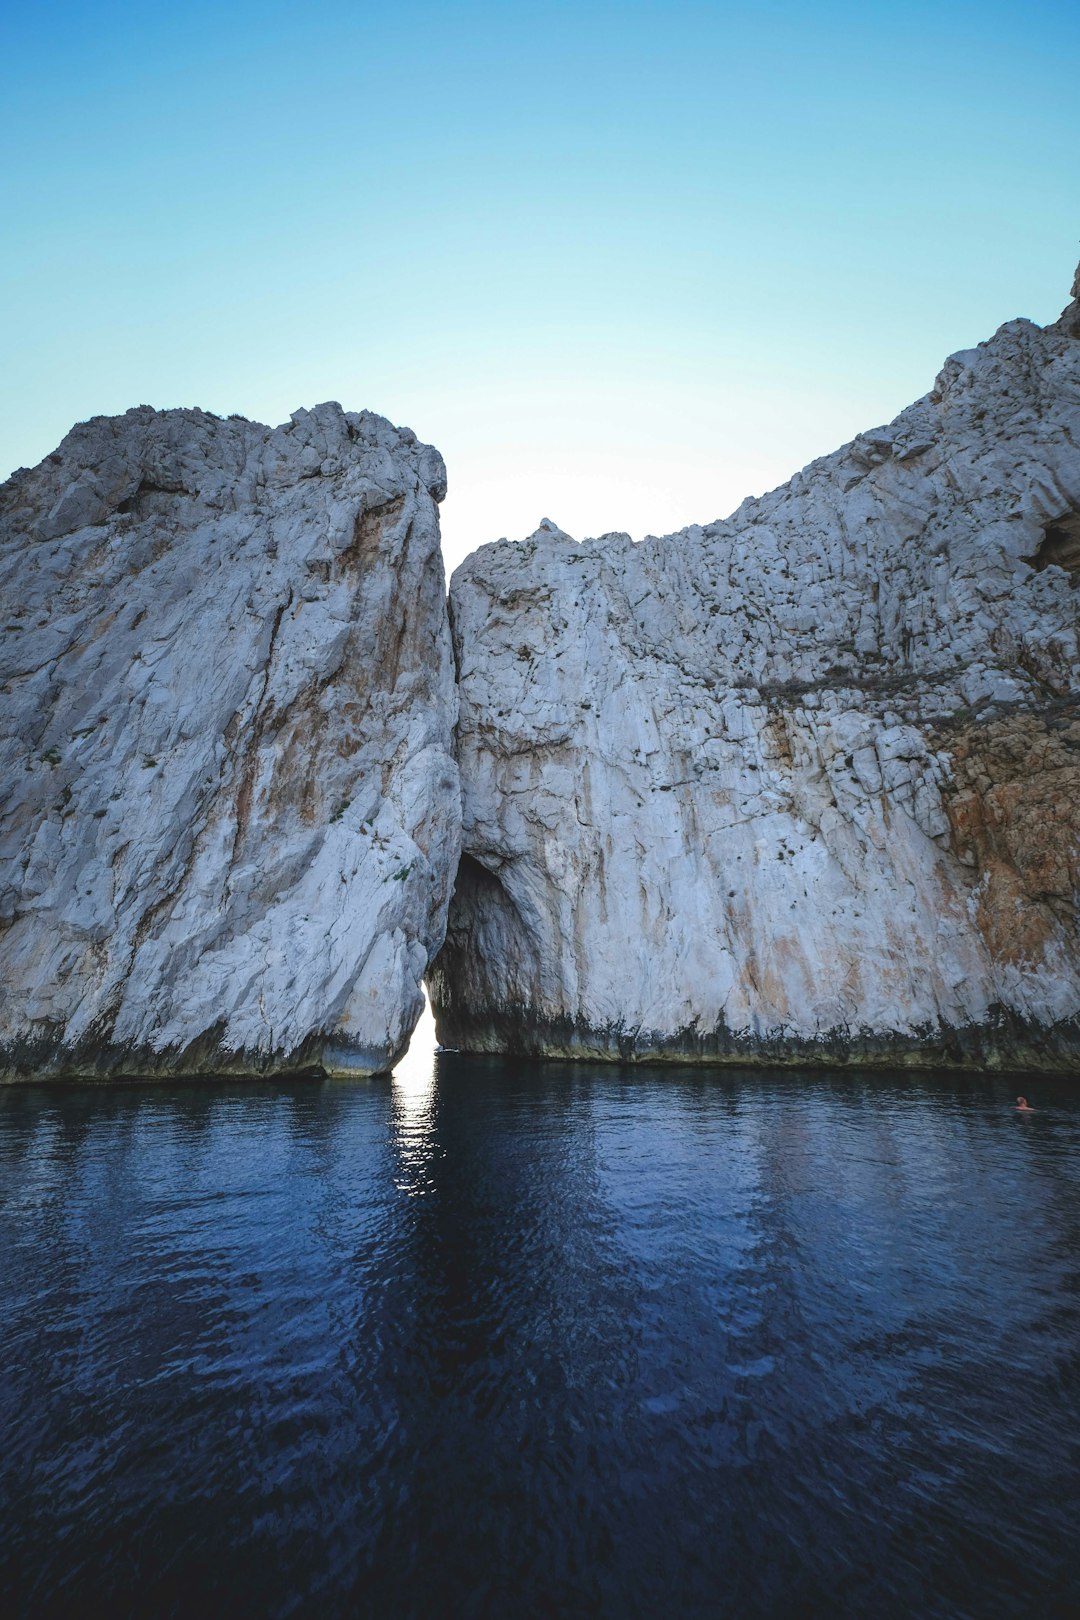 gray rock formation on blue water during daytime